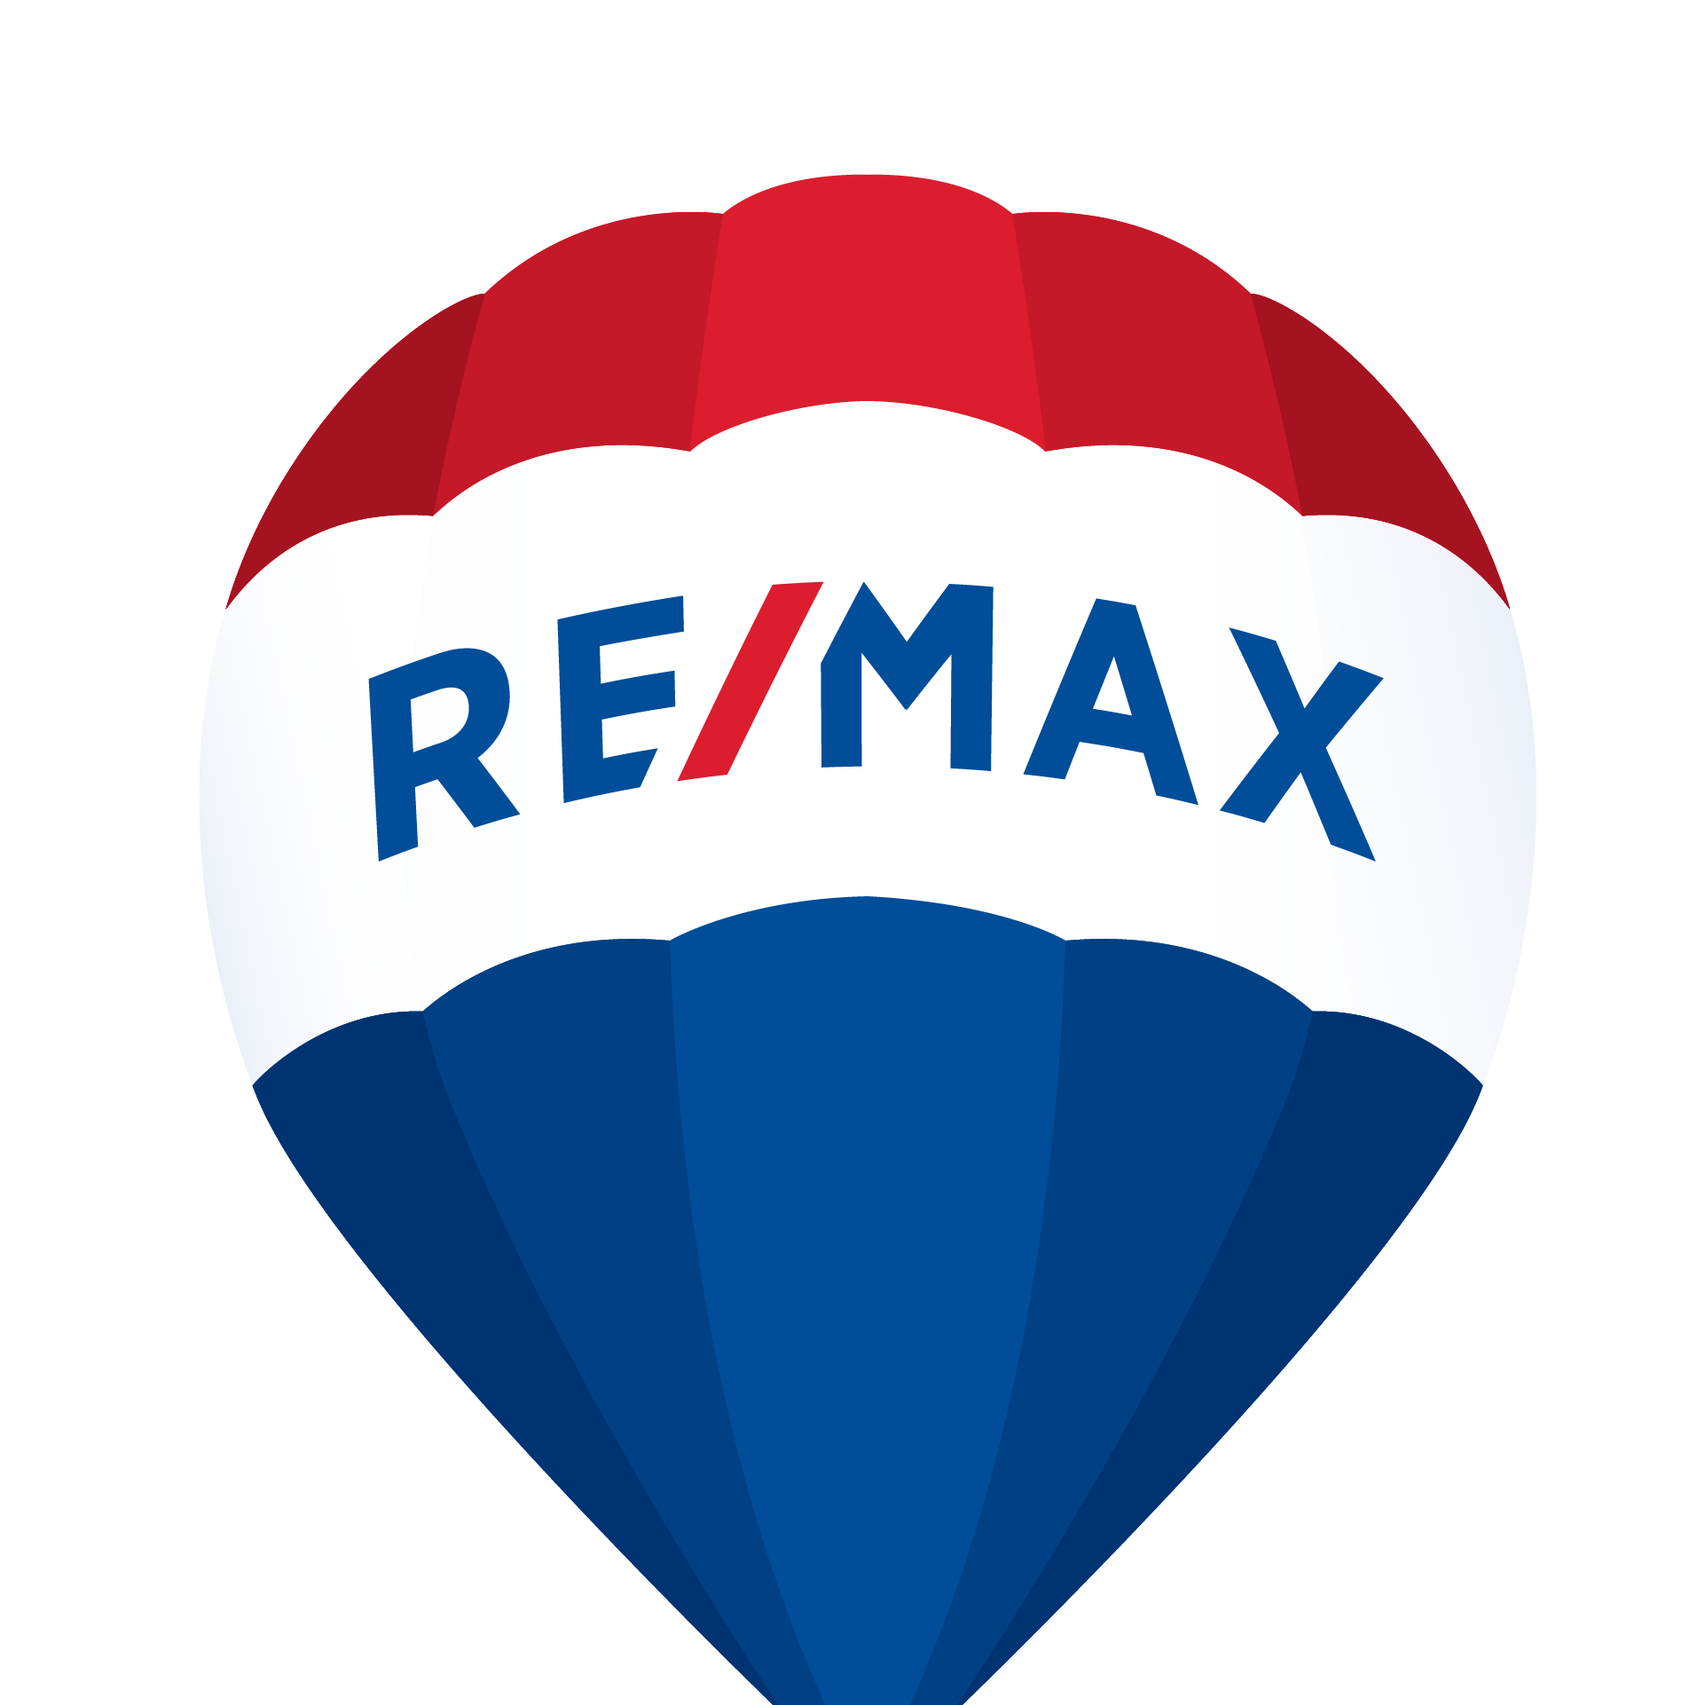 REMAX Colonial